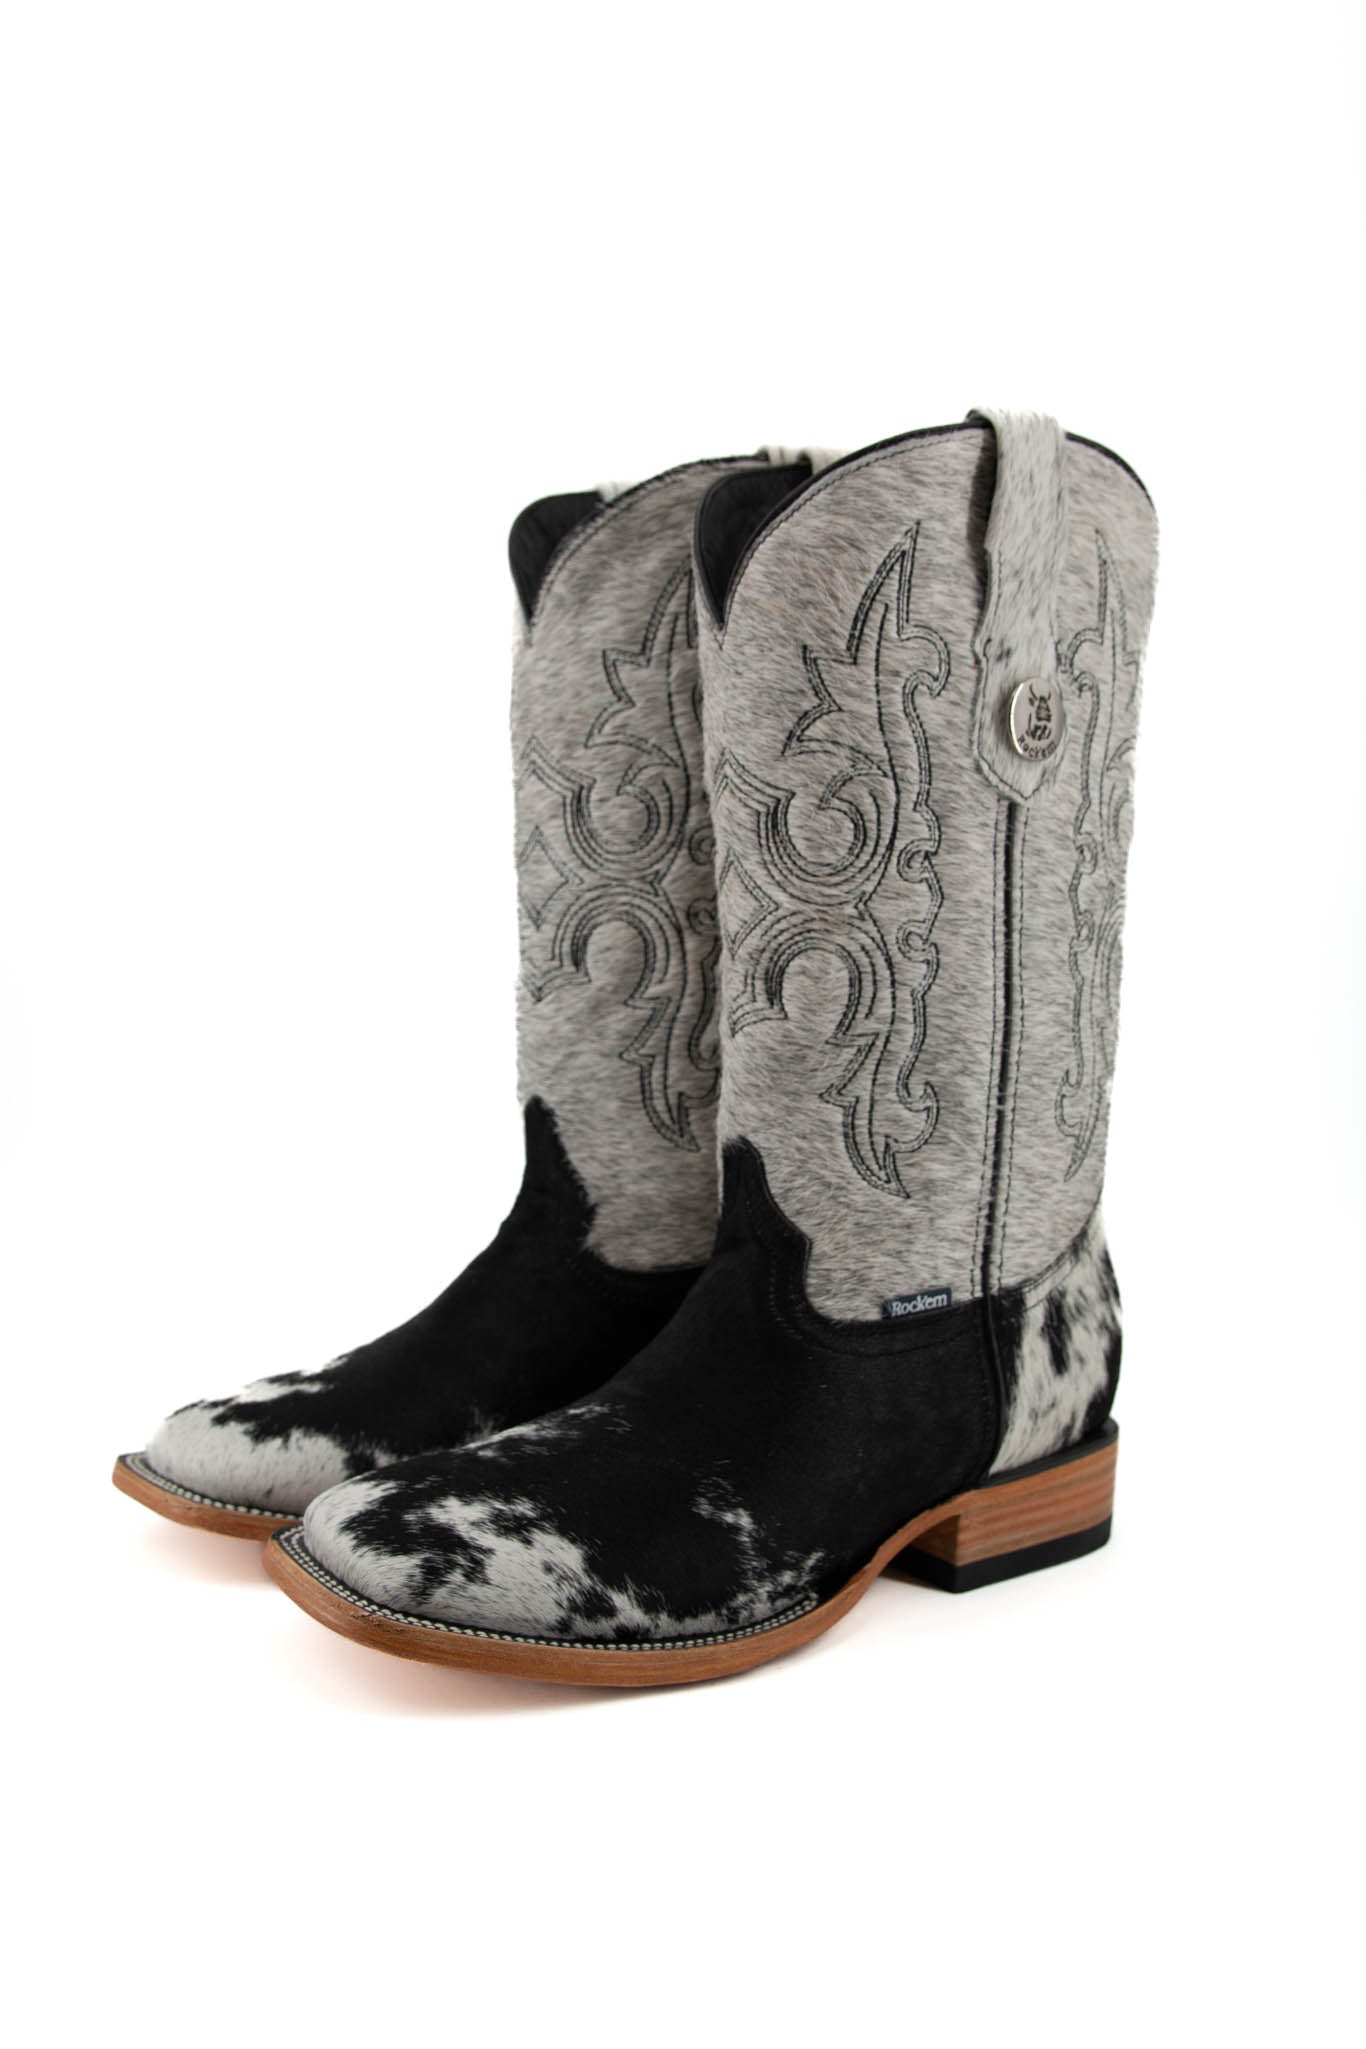 Women's Cowhide Square Toe Boot Size 10 Box 2K **AS SEEN ON IMAGE**